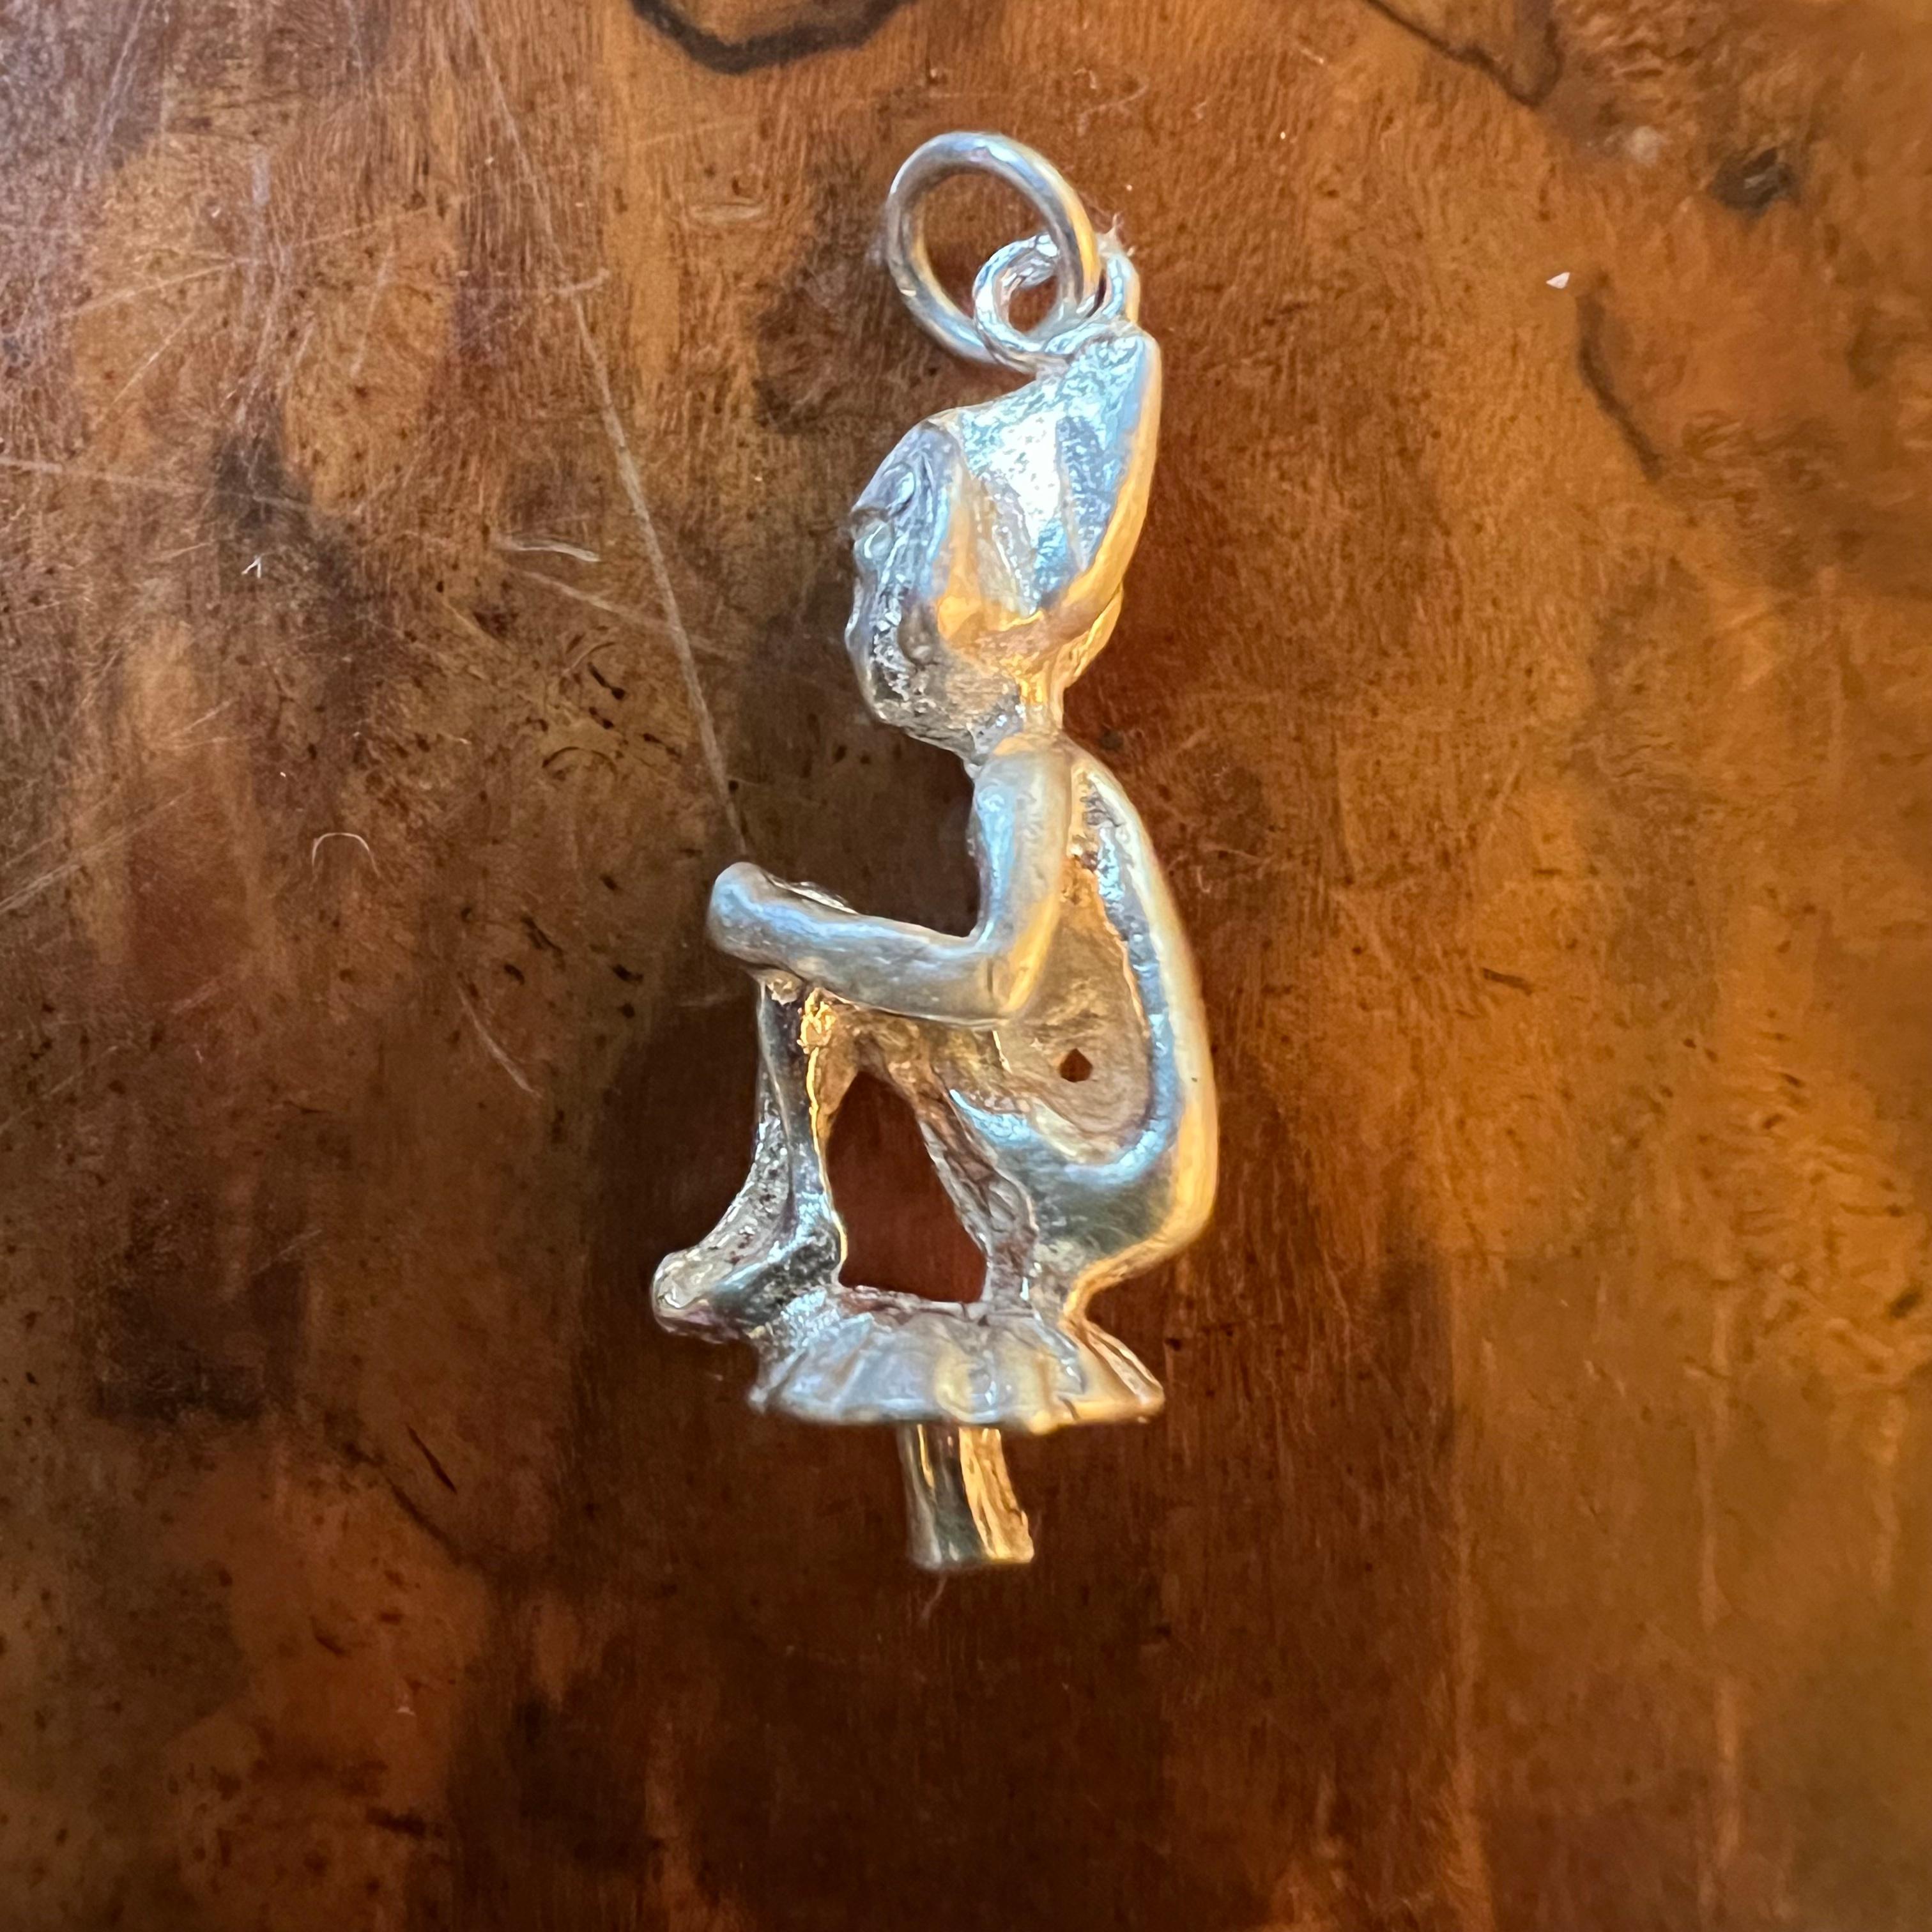 Elf sitting on mushroom pendant/charm, jewellery is preowned and is sold in 